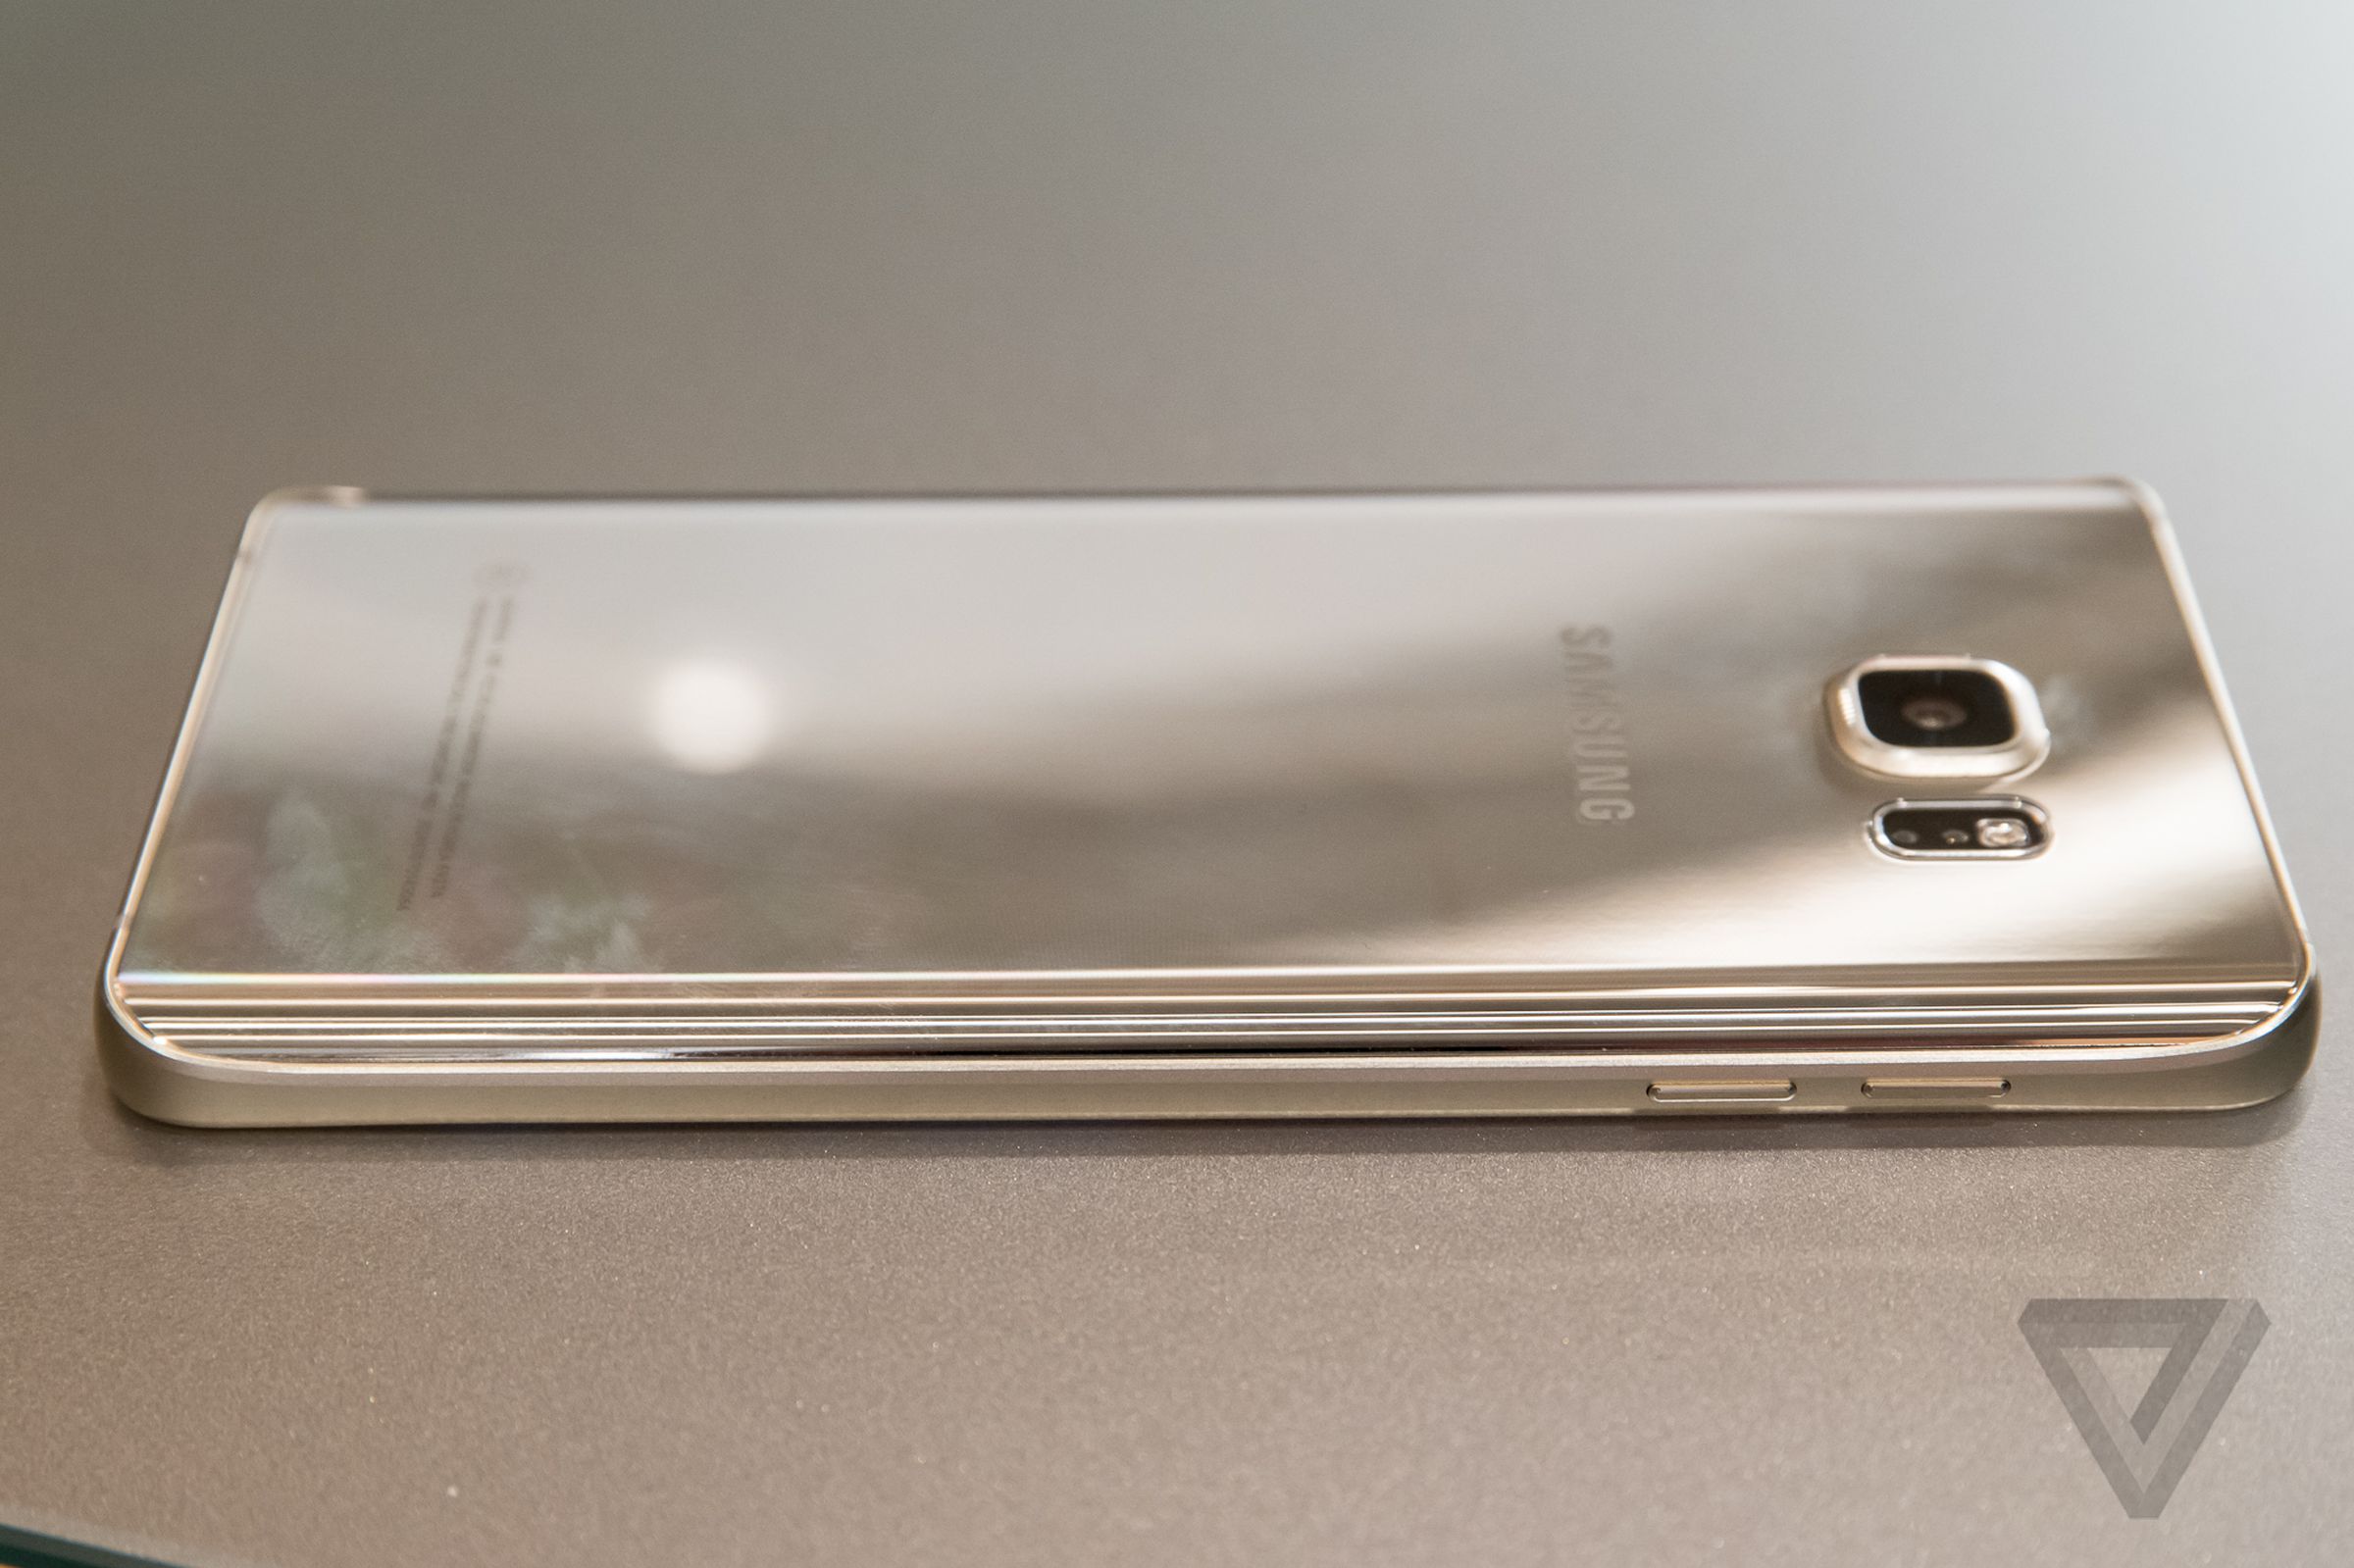 Samsung Galaxy Note 5 hands-on images